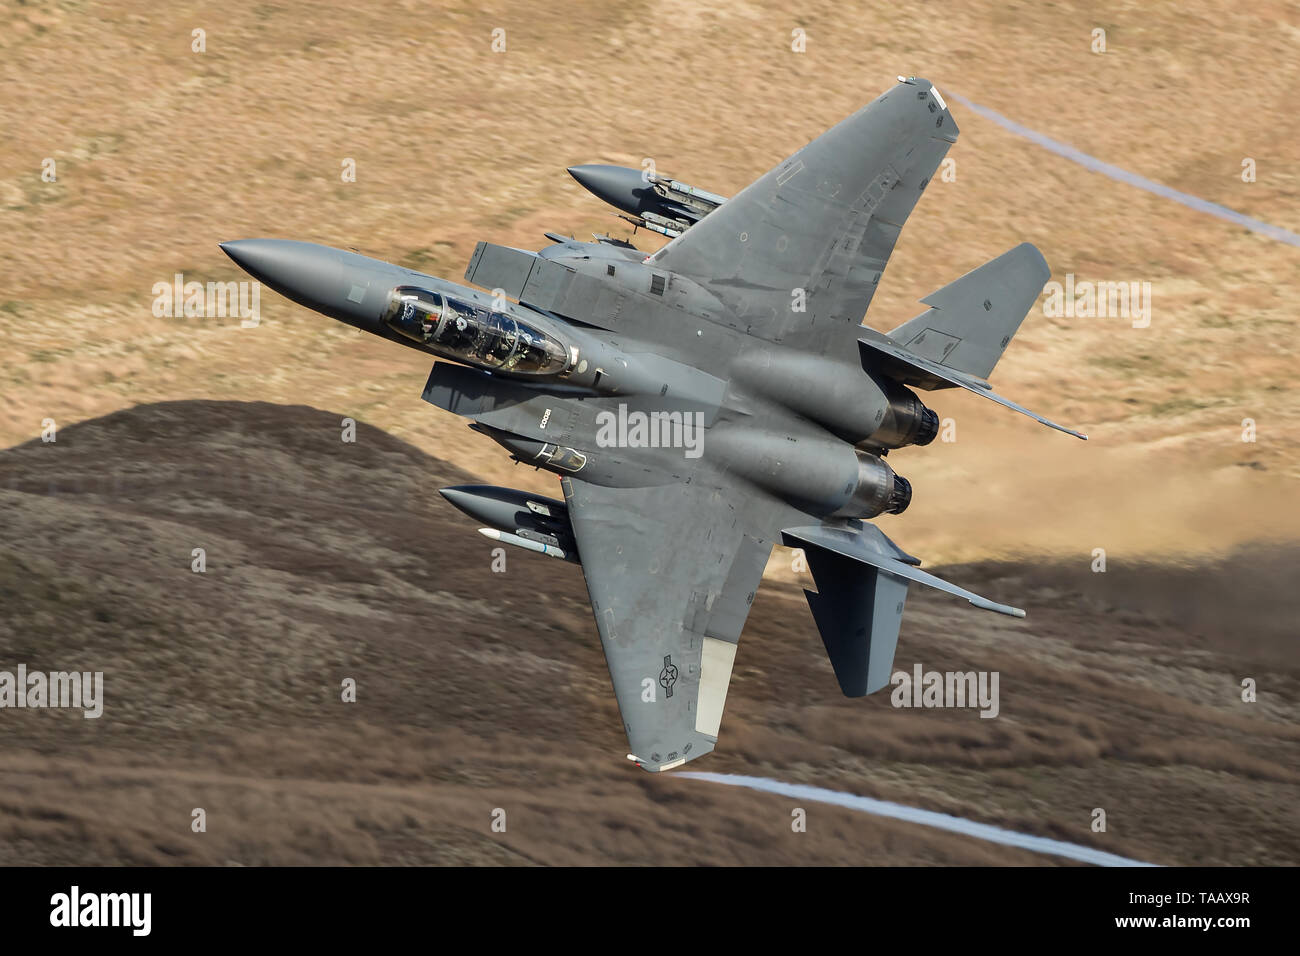 A USAF F-15E Strike Eagle exits the Bwlch Exit in the Mach Loop in Wales, UK Stock Photo